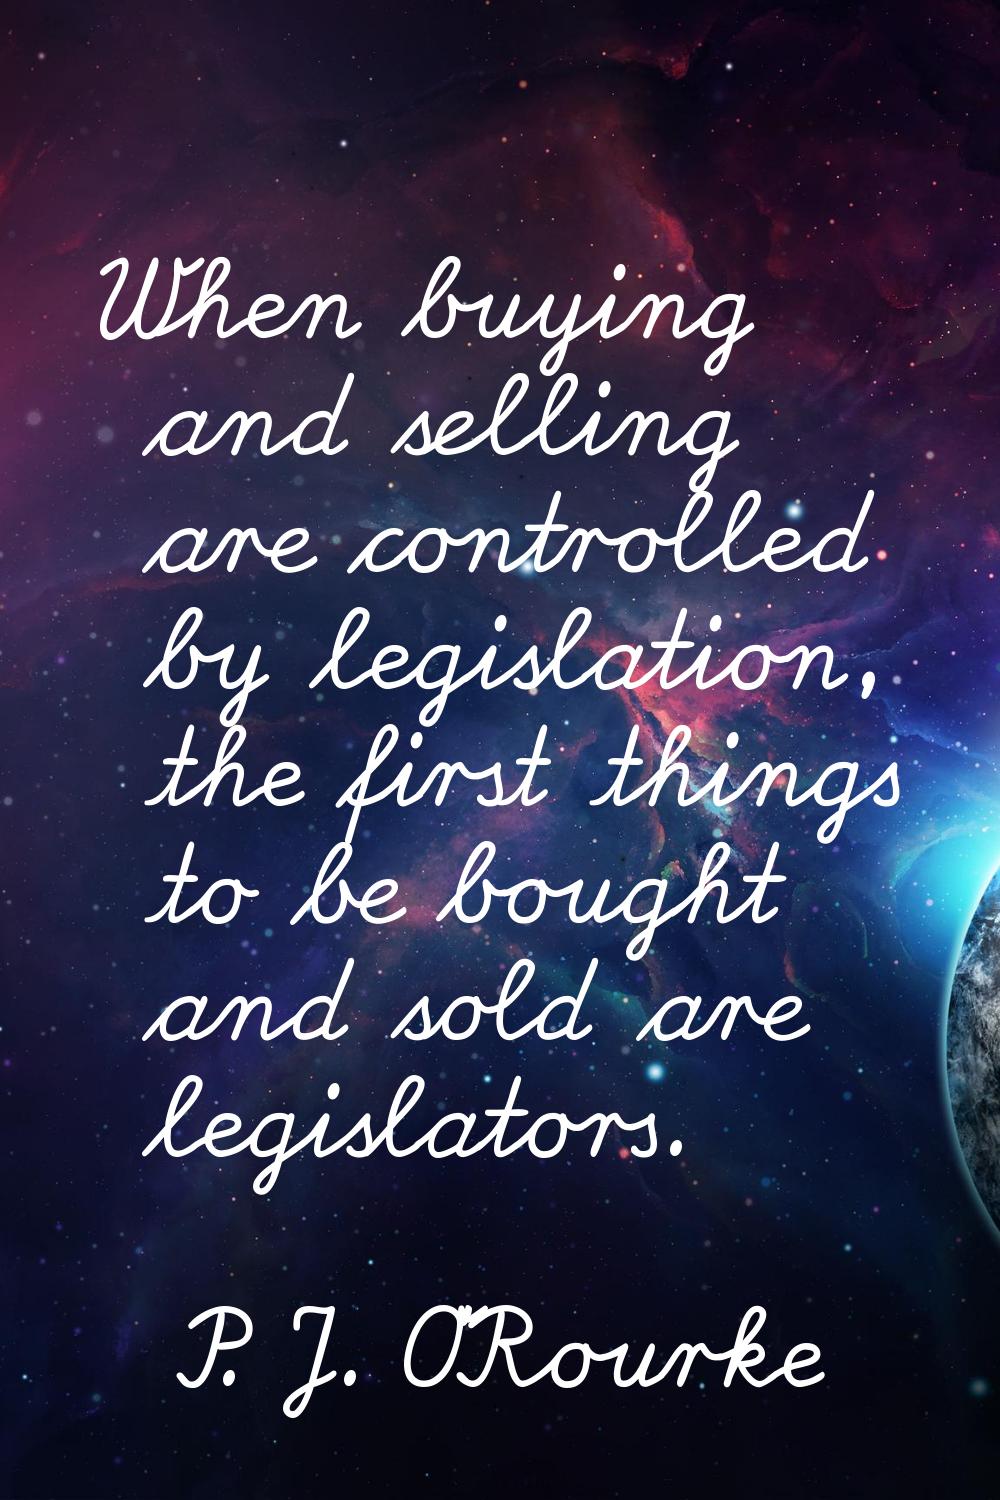 When buying and selling are controlled by legislation, the first things to be bought and sold are l